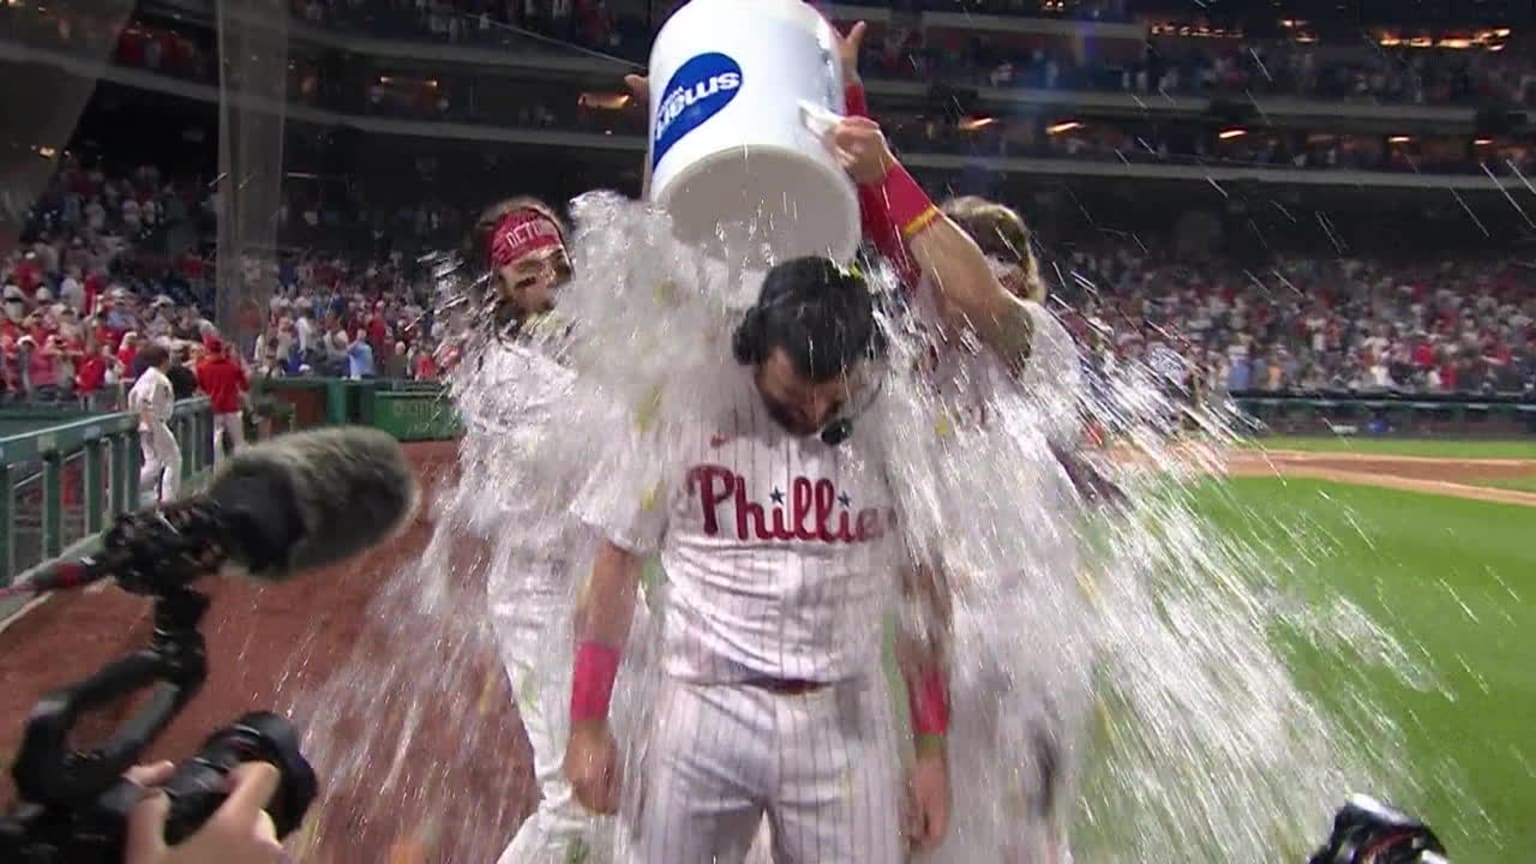 Schwarber's walkoff HR lifts Phillies past Dodgers for sixth